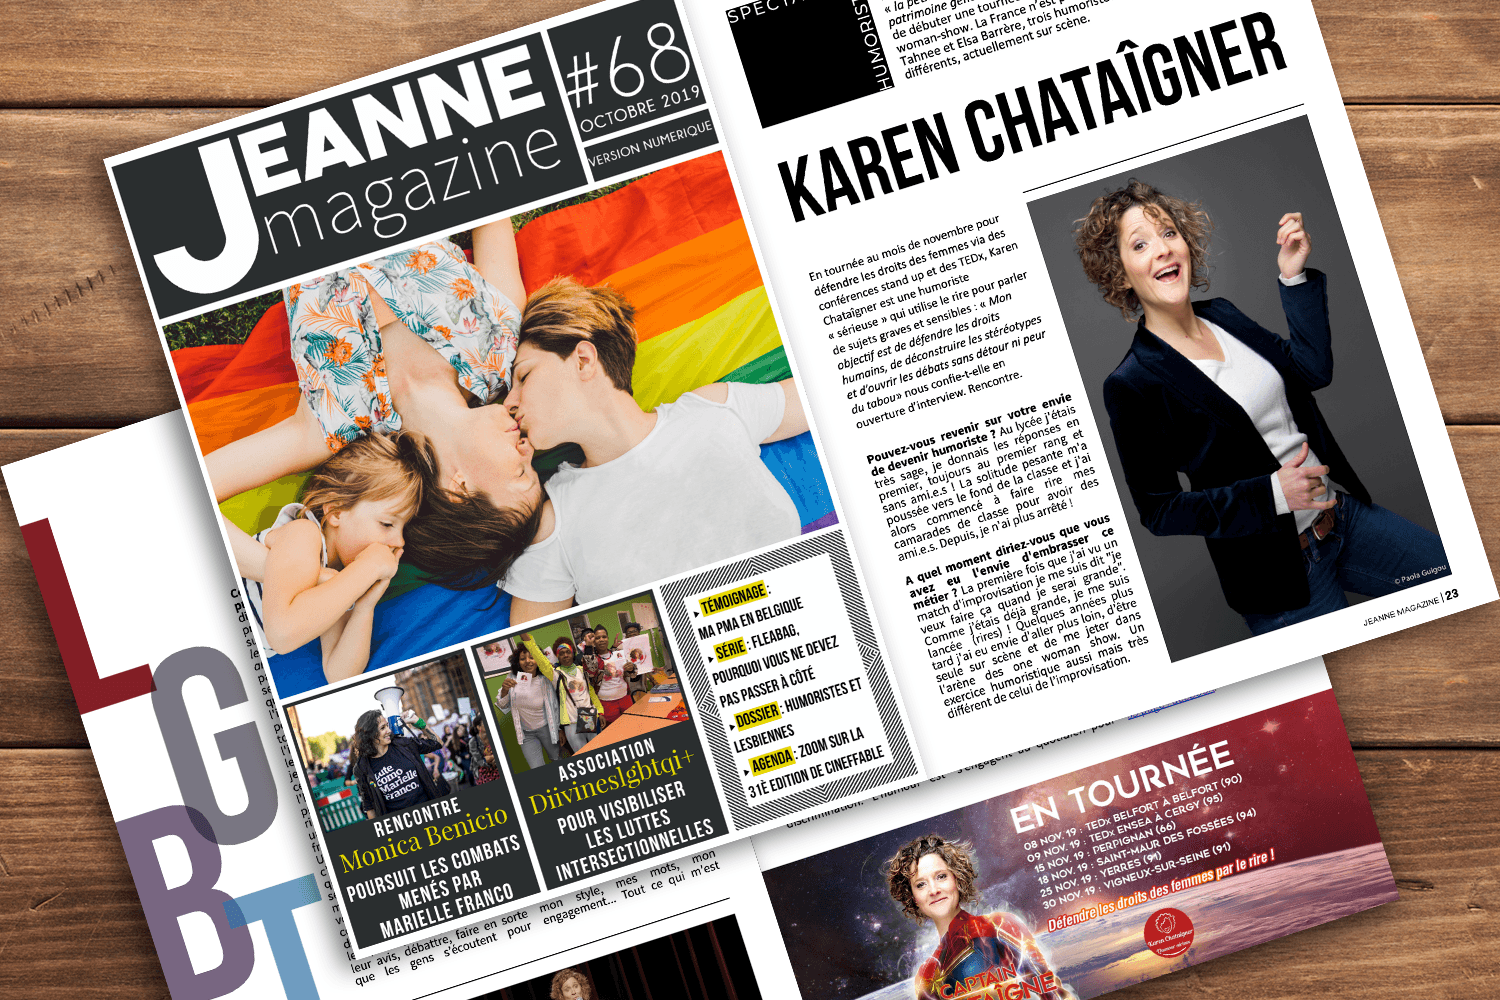 You are currently viewing Karen Chataîgner dans Jeanne Magazine